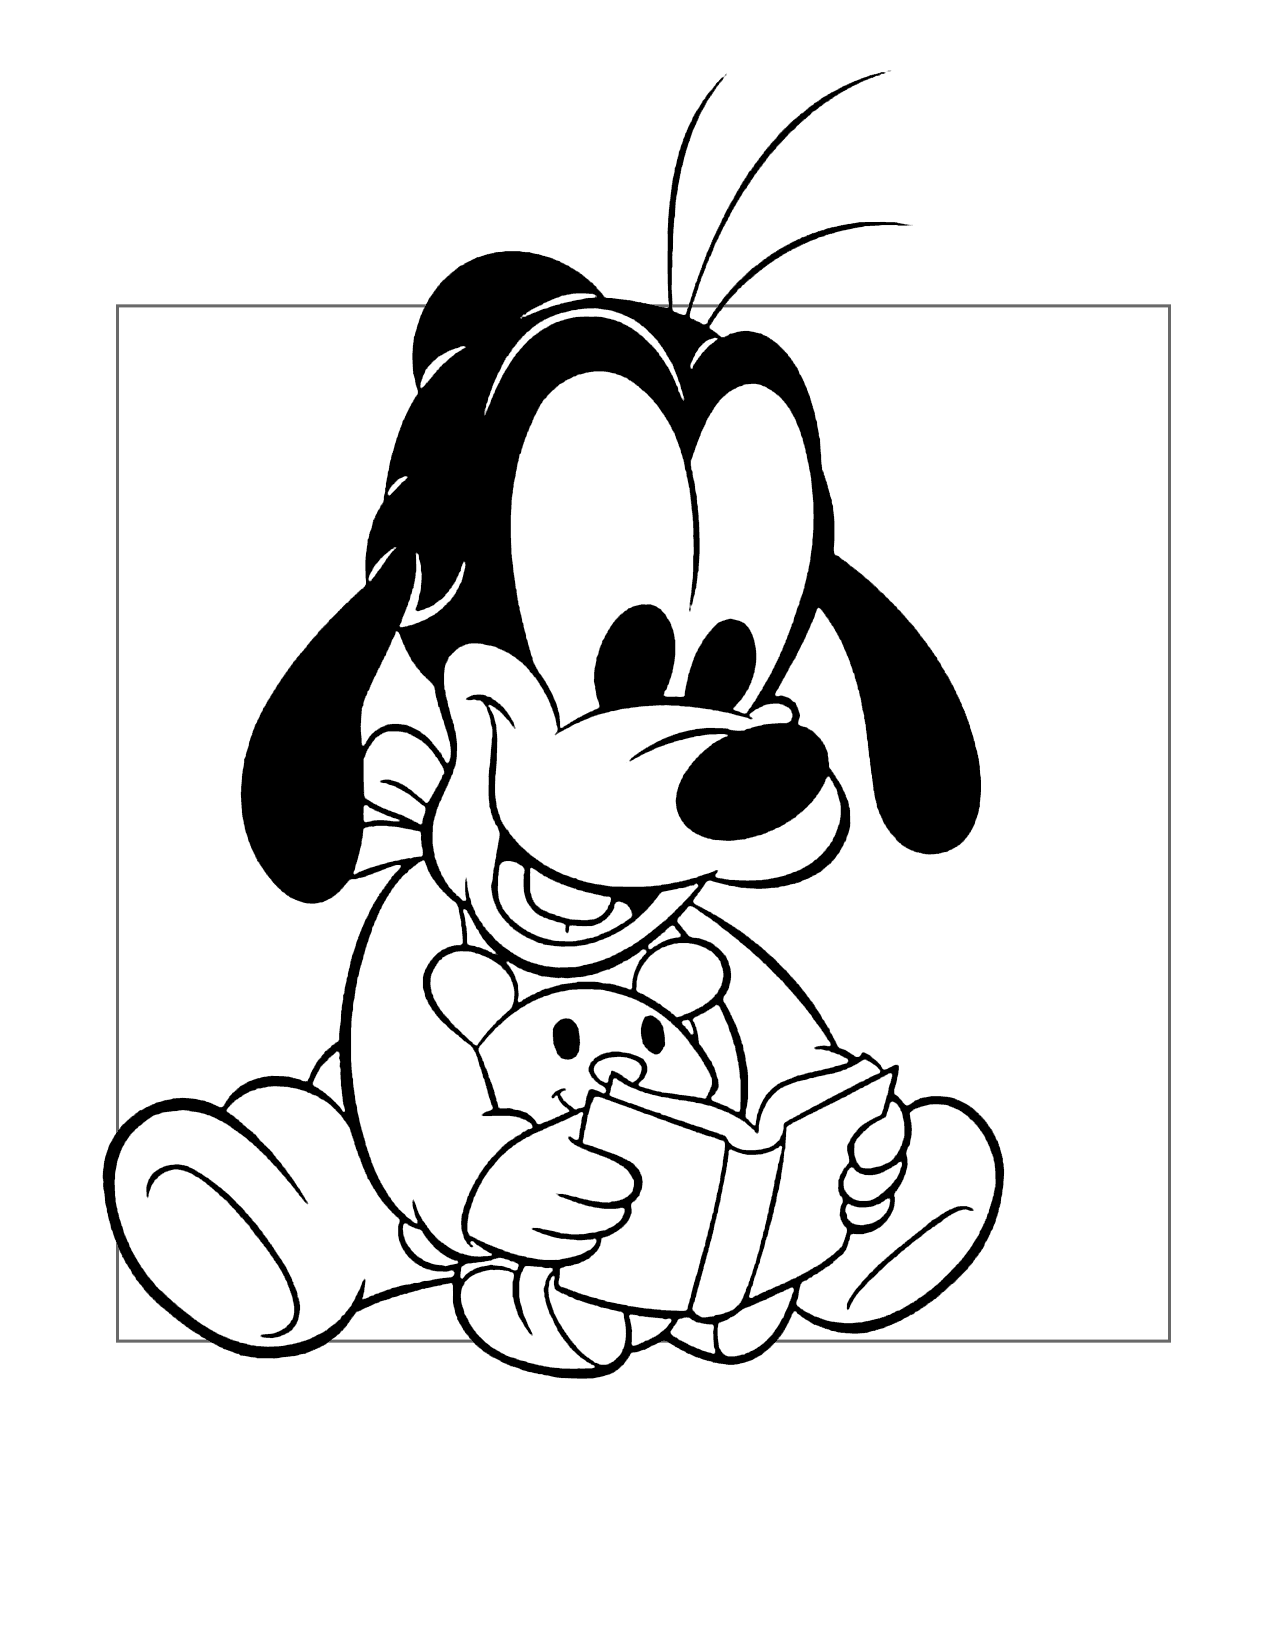 Baby Goofy Reads A Book Coloring Page